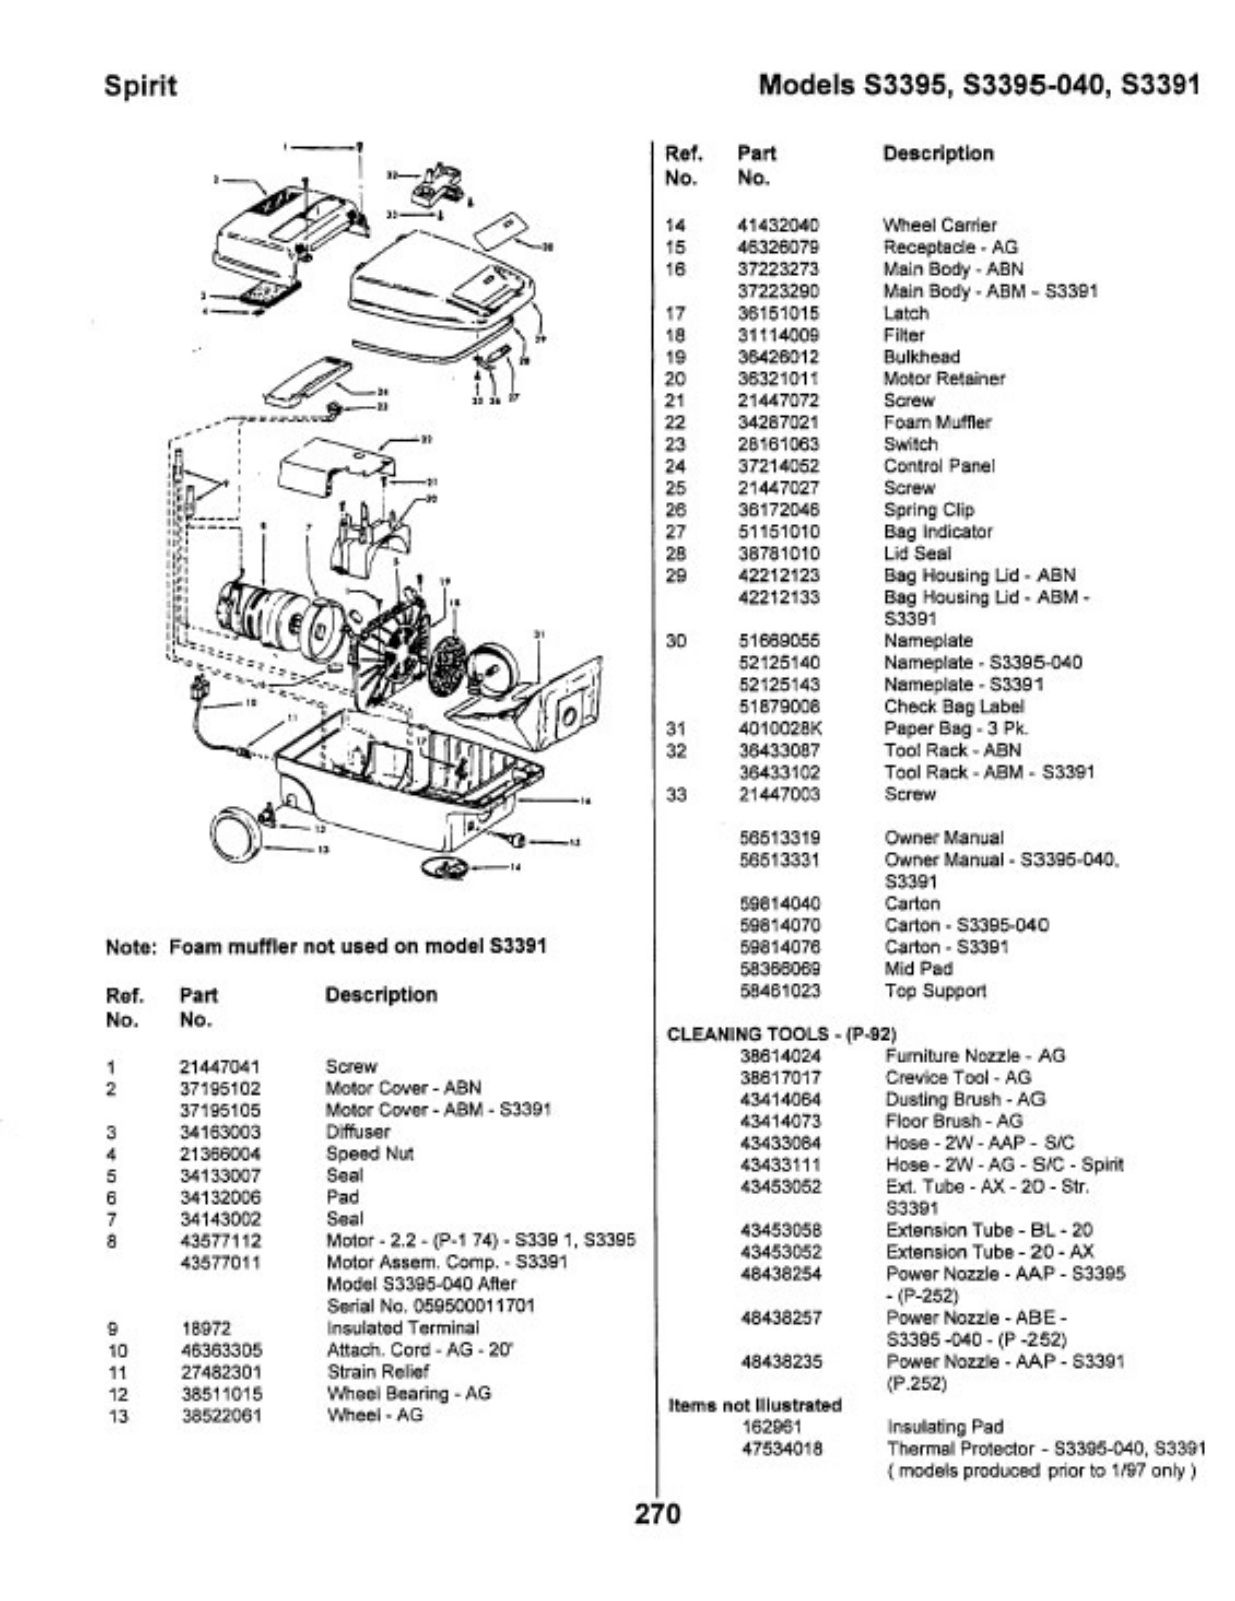 Hoover S3395, S3395-040, S3391 Owner's Manual